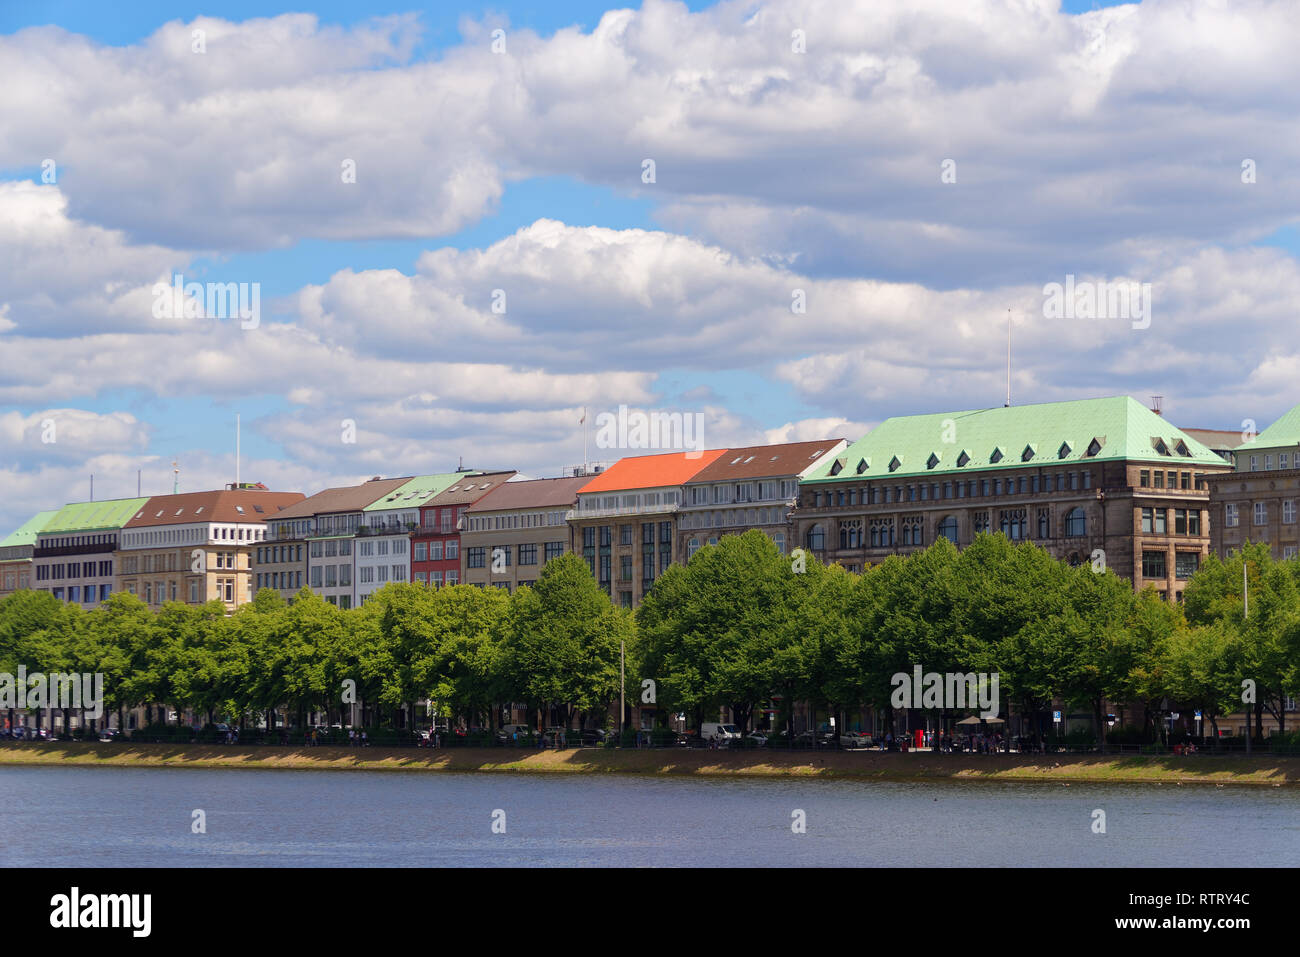 Hamburg, Germany - 30 June, 2018: Colorful roofs of buildings on Ballindamm, Jungfernstieg against blue cloudy sky Stock Photo